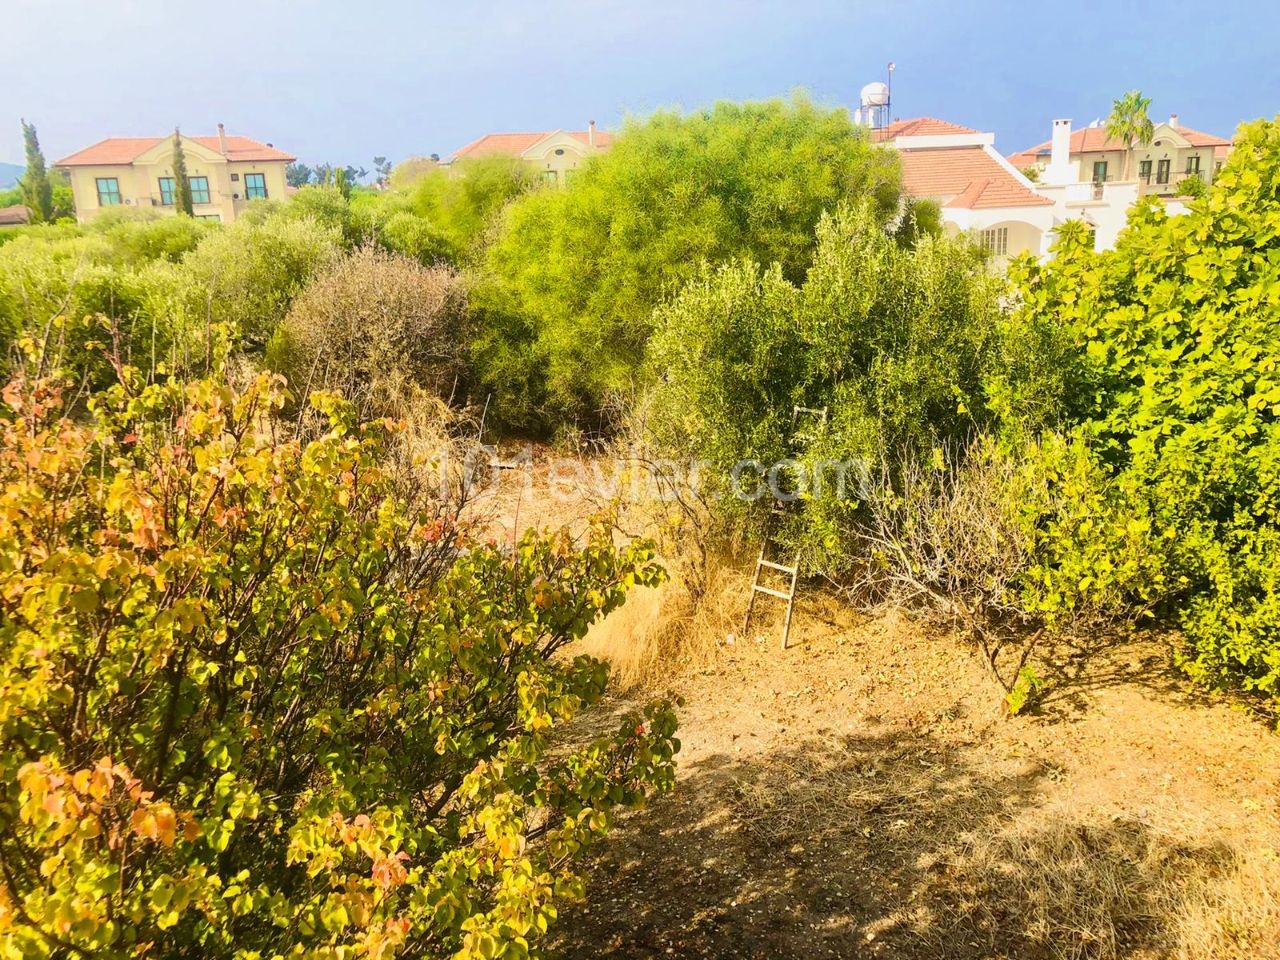 2 dönüm 2030 square feet land and 3+1 villa for sale in Lapta close to the sea and Lapta Coastal Walkway.